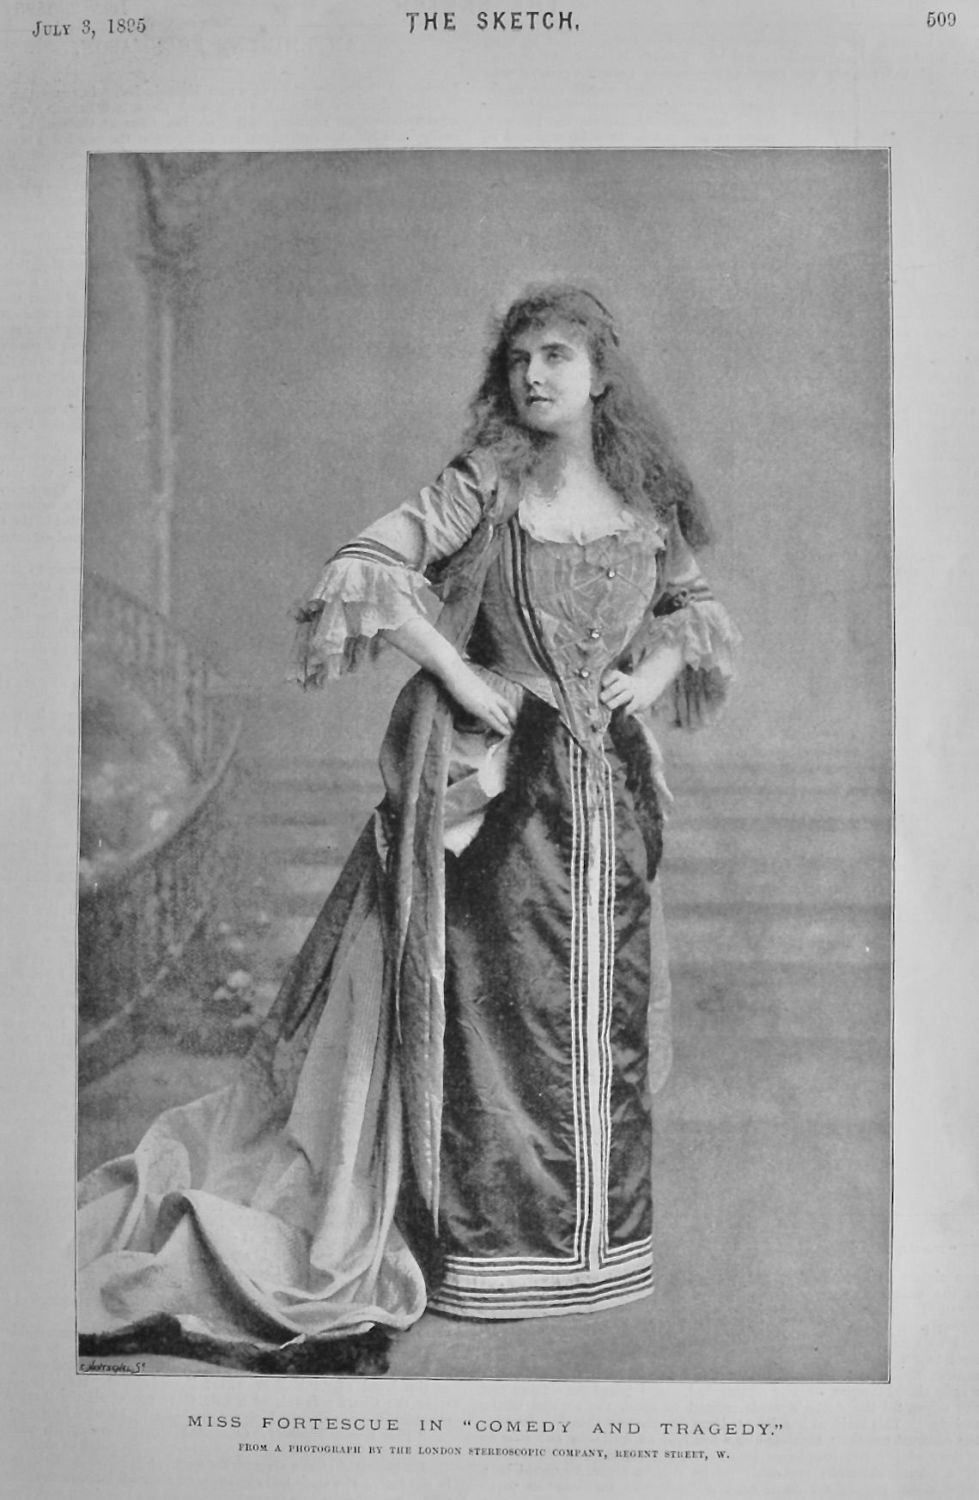 Miss Fortescue in 